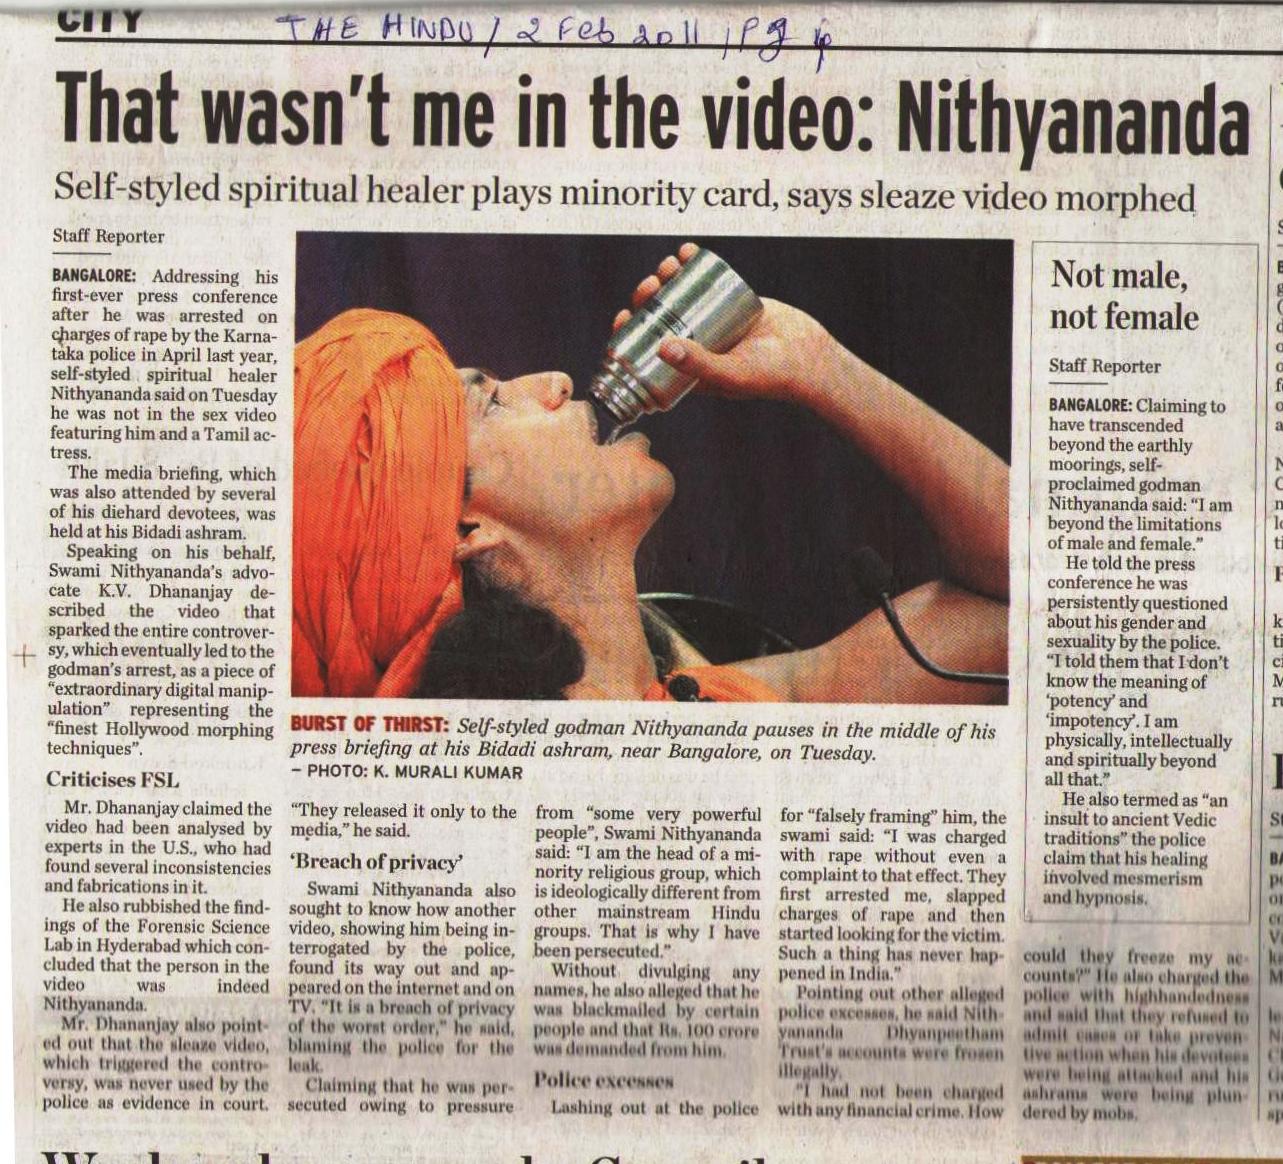 The Hindu_2 Feb 2011_Pg 4_That wasnt me in the video Nithyananda_Bangalore